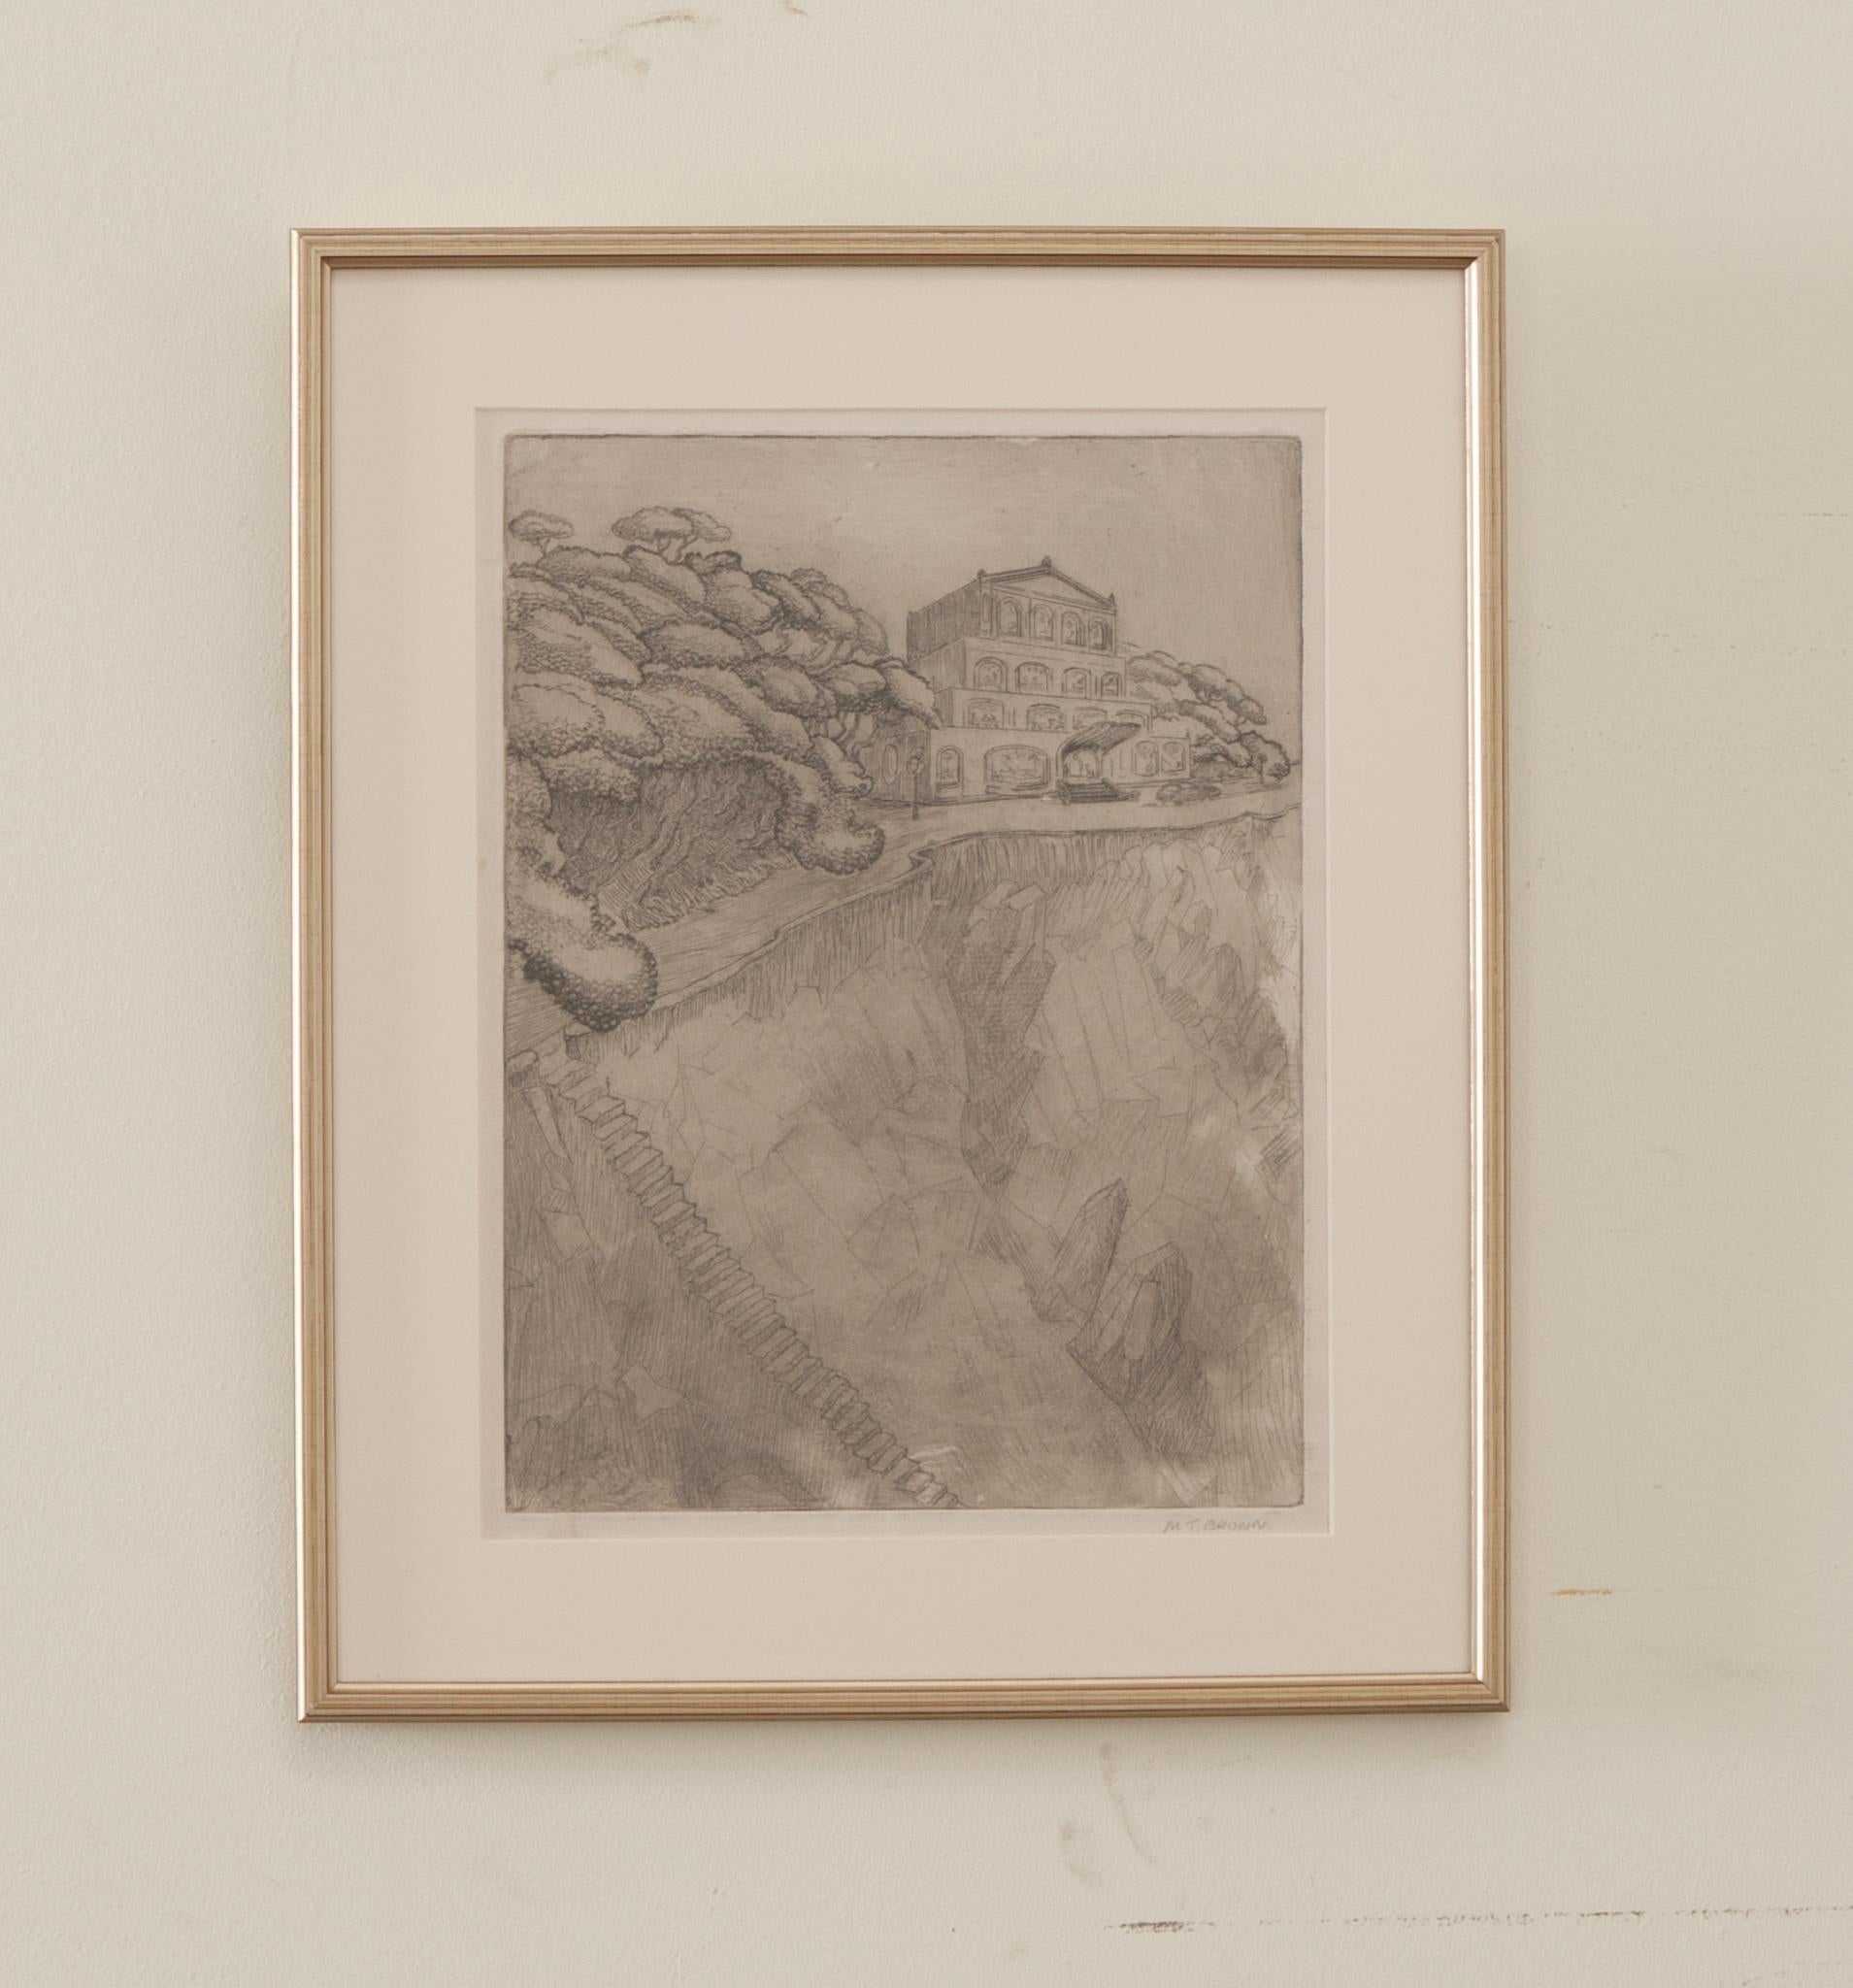 An ink and pencil landscape drawing from England signed by M.T. Brown. Recently matted and framed, this drawing has the viewer standing close to see all the well rendered details, fine lines and shading. The imagery is an interesting scene depicting